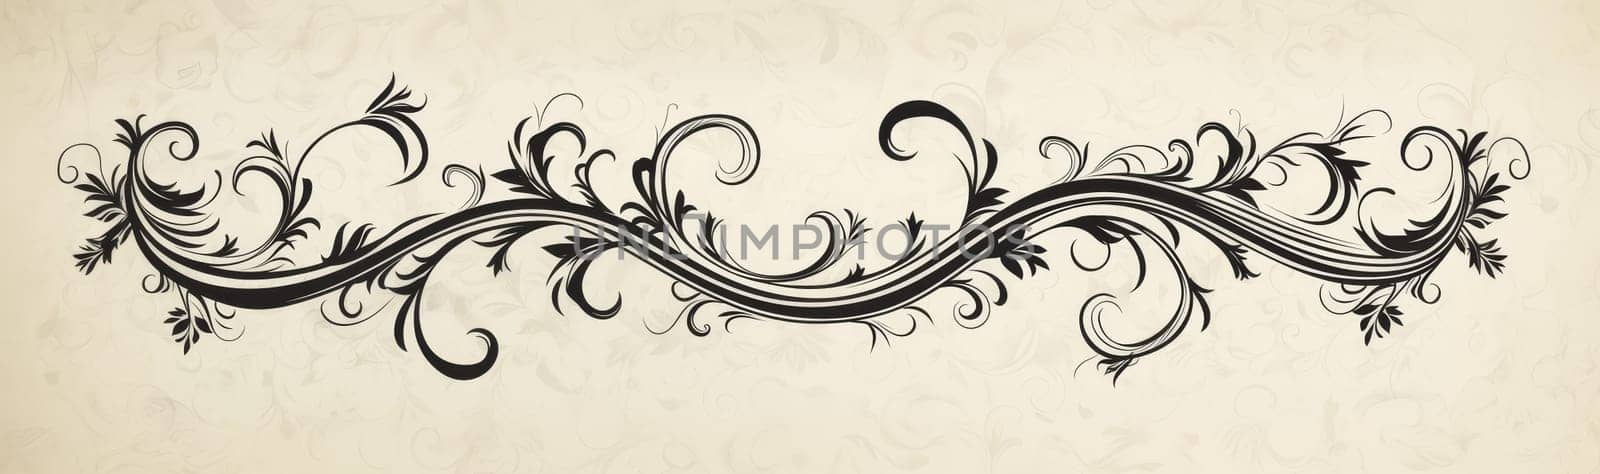 Wide, panoramic vintage ornamental design with intricate floral patterns on a cream background. by sfinks